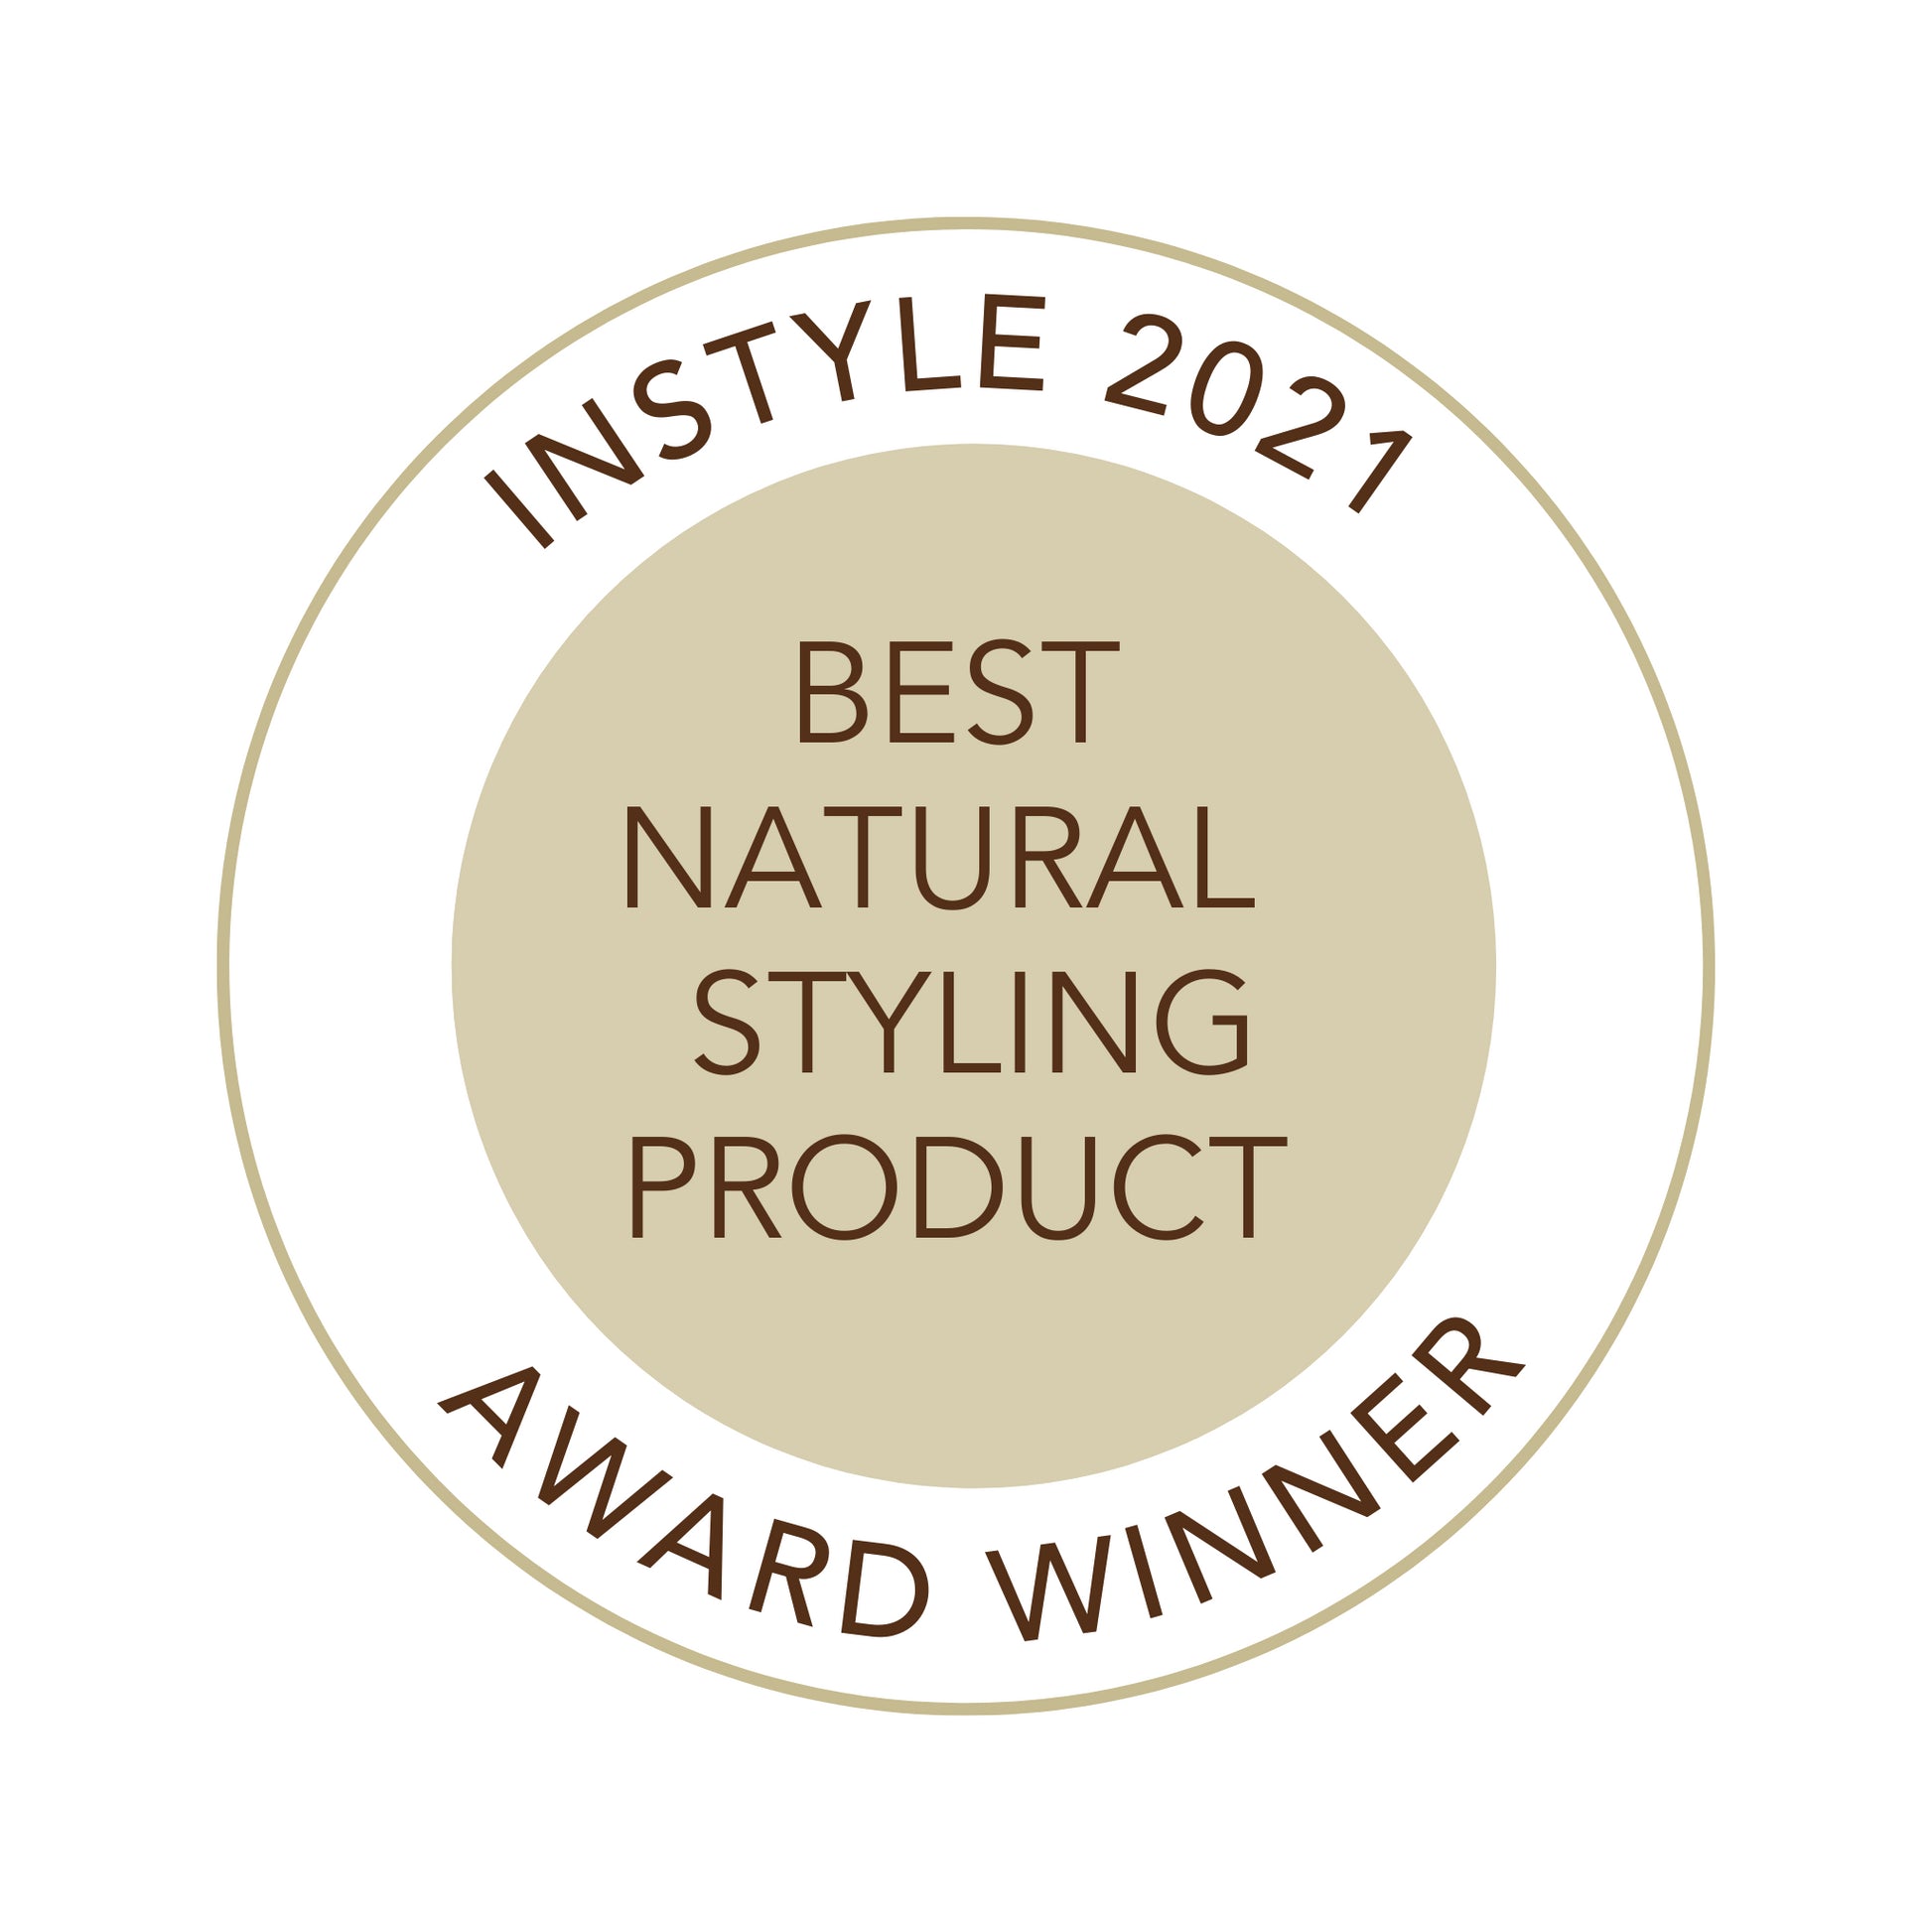 Instyle 2021 Best Natural Styling Product Award Winner